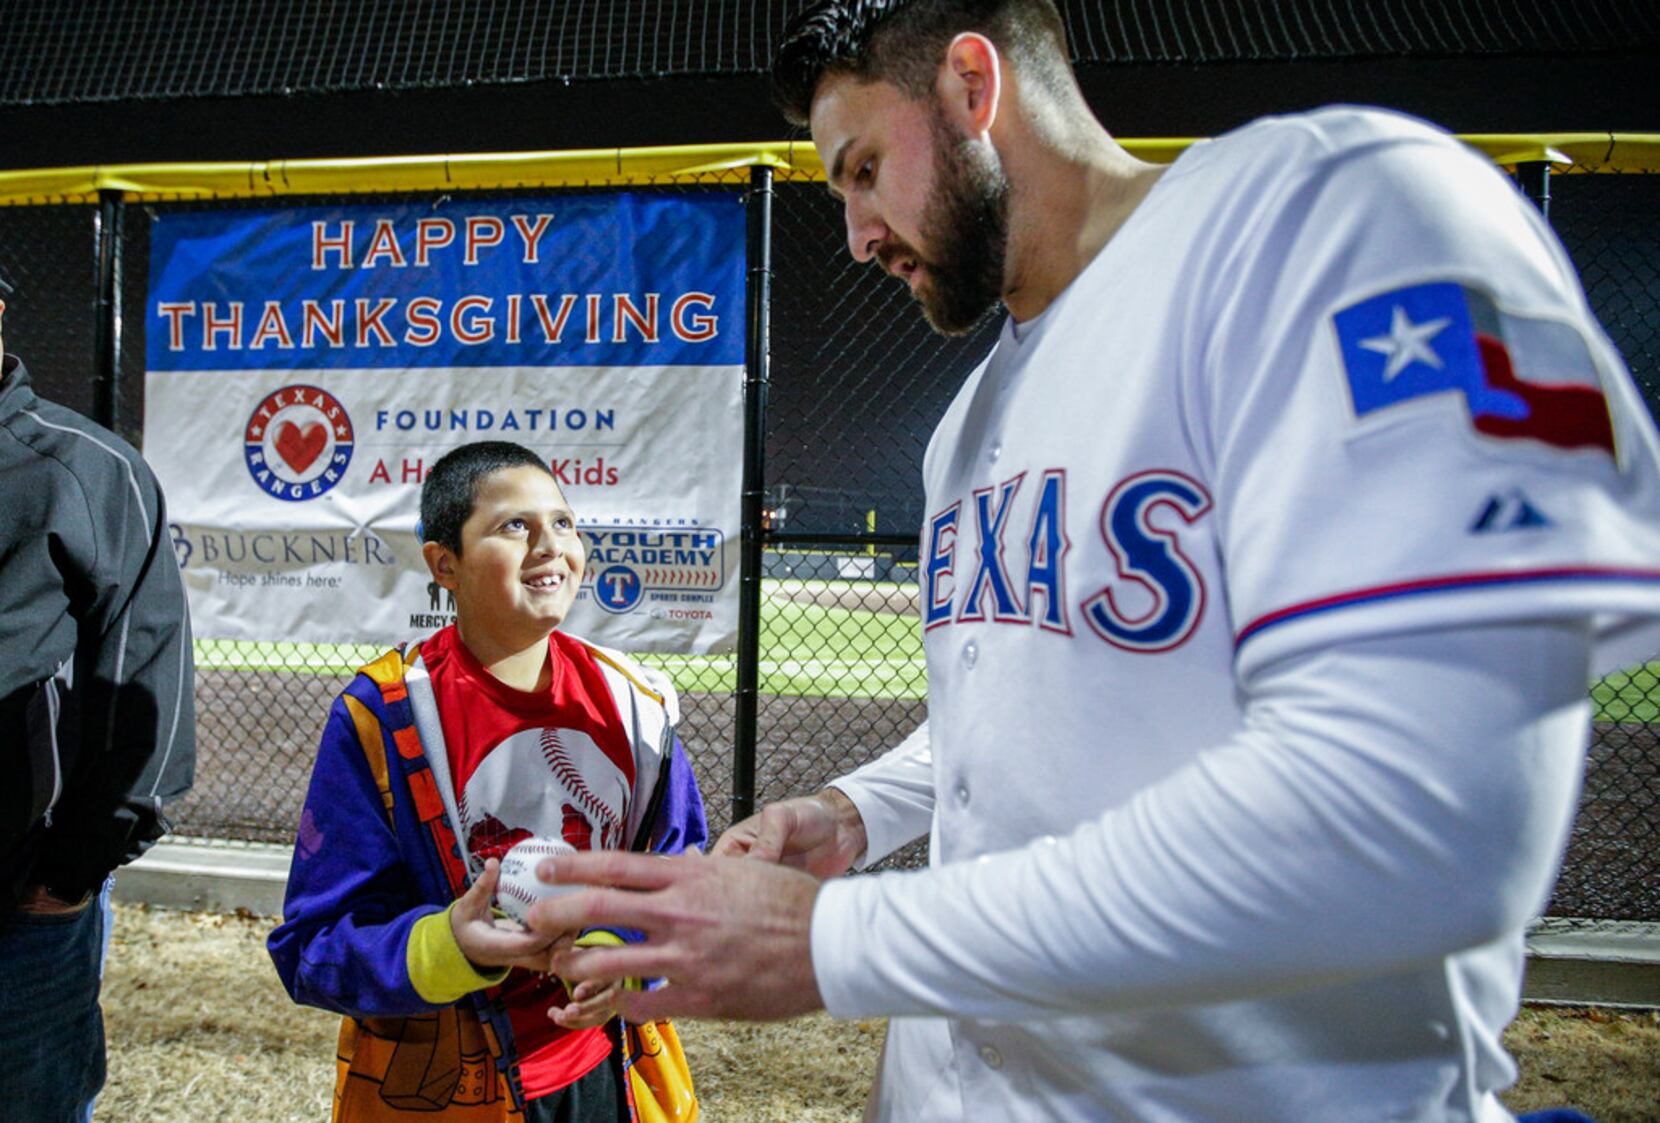 PHOTOS: Joey Gallo, Nomar Mazara and other Rangers pass out